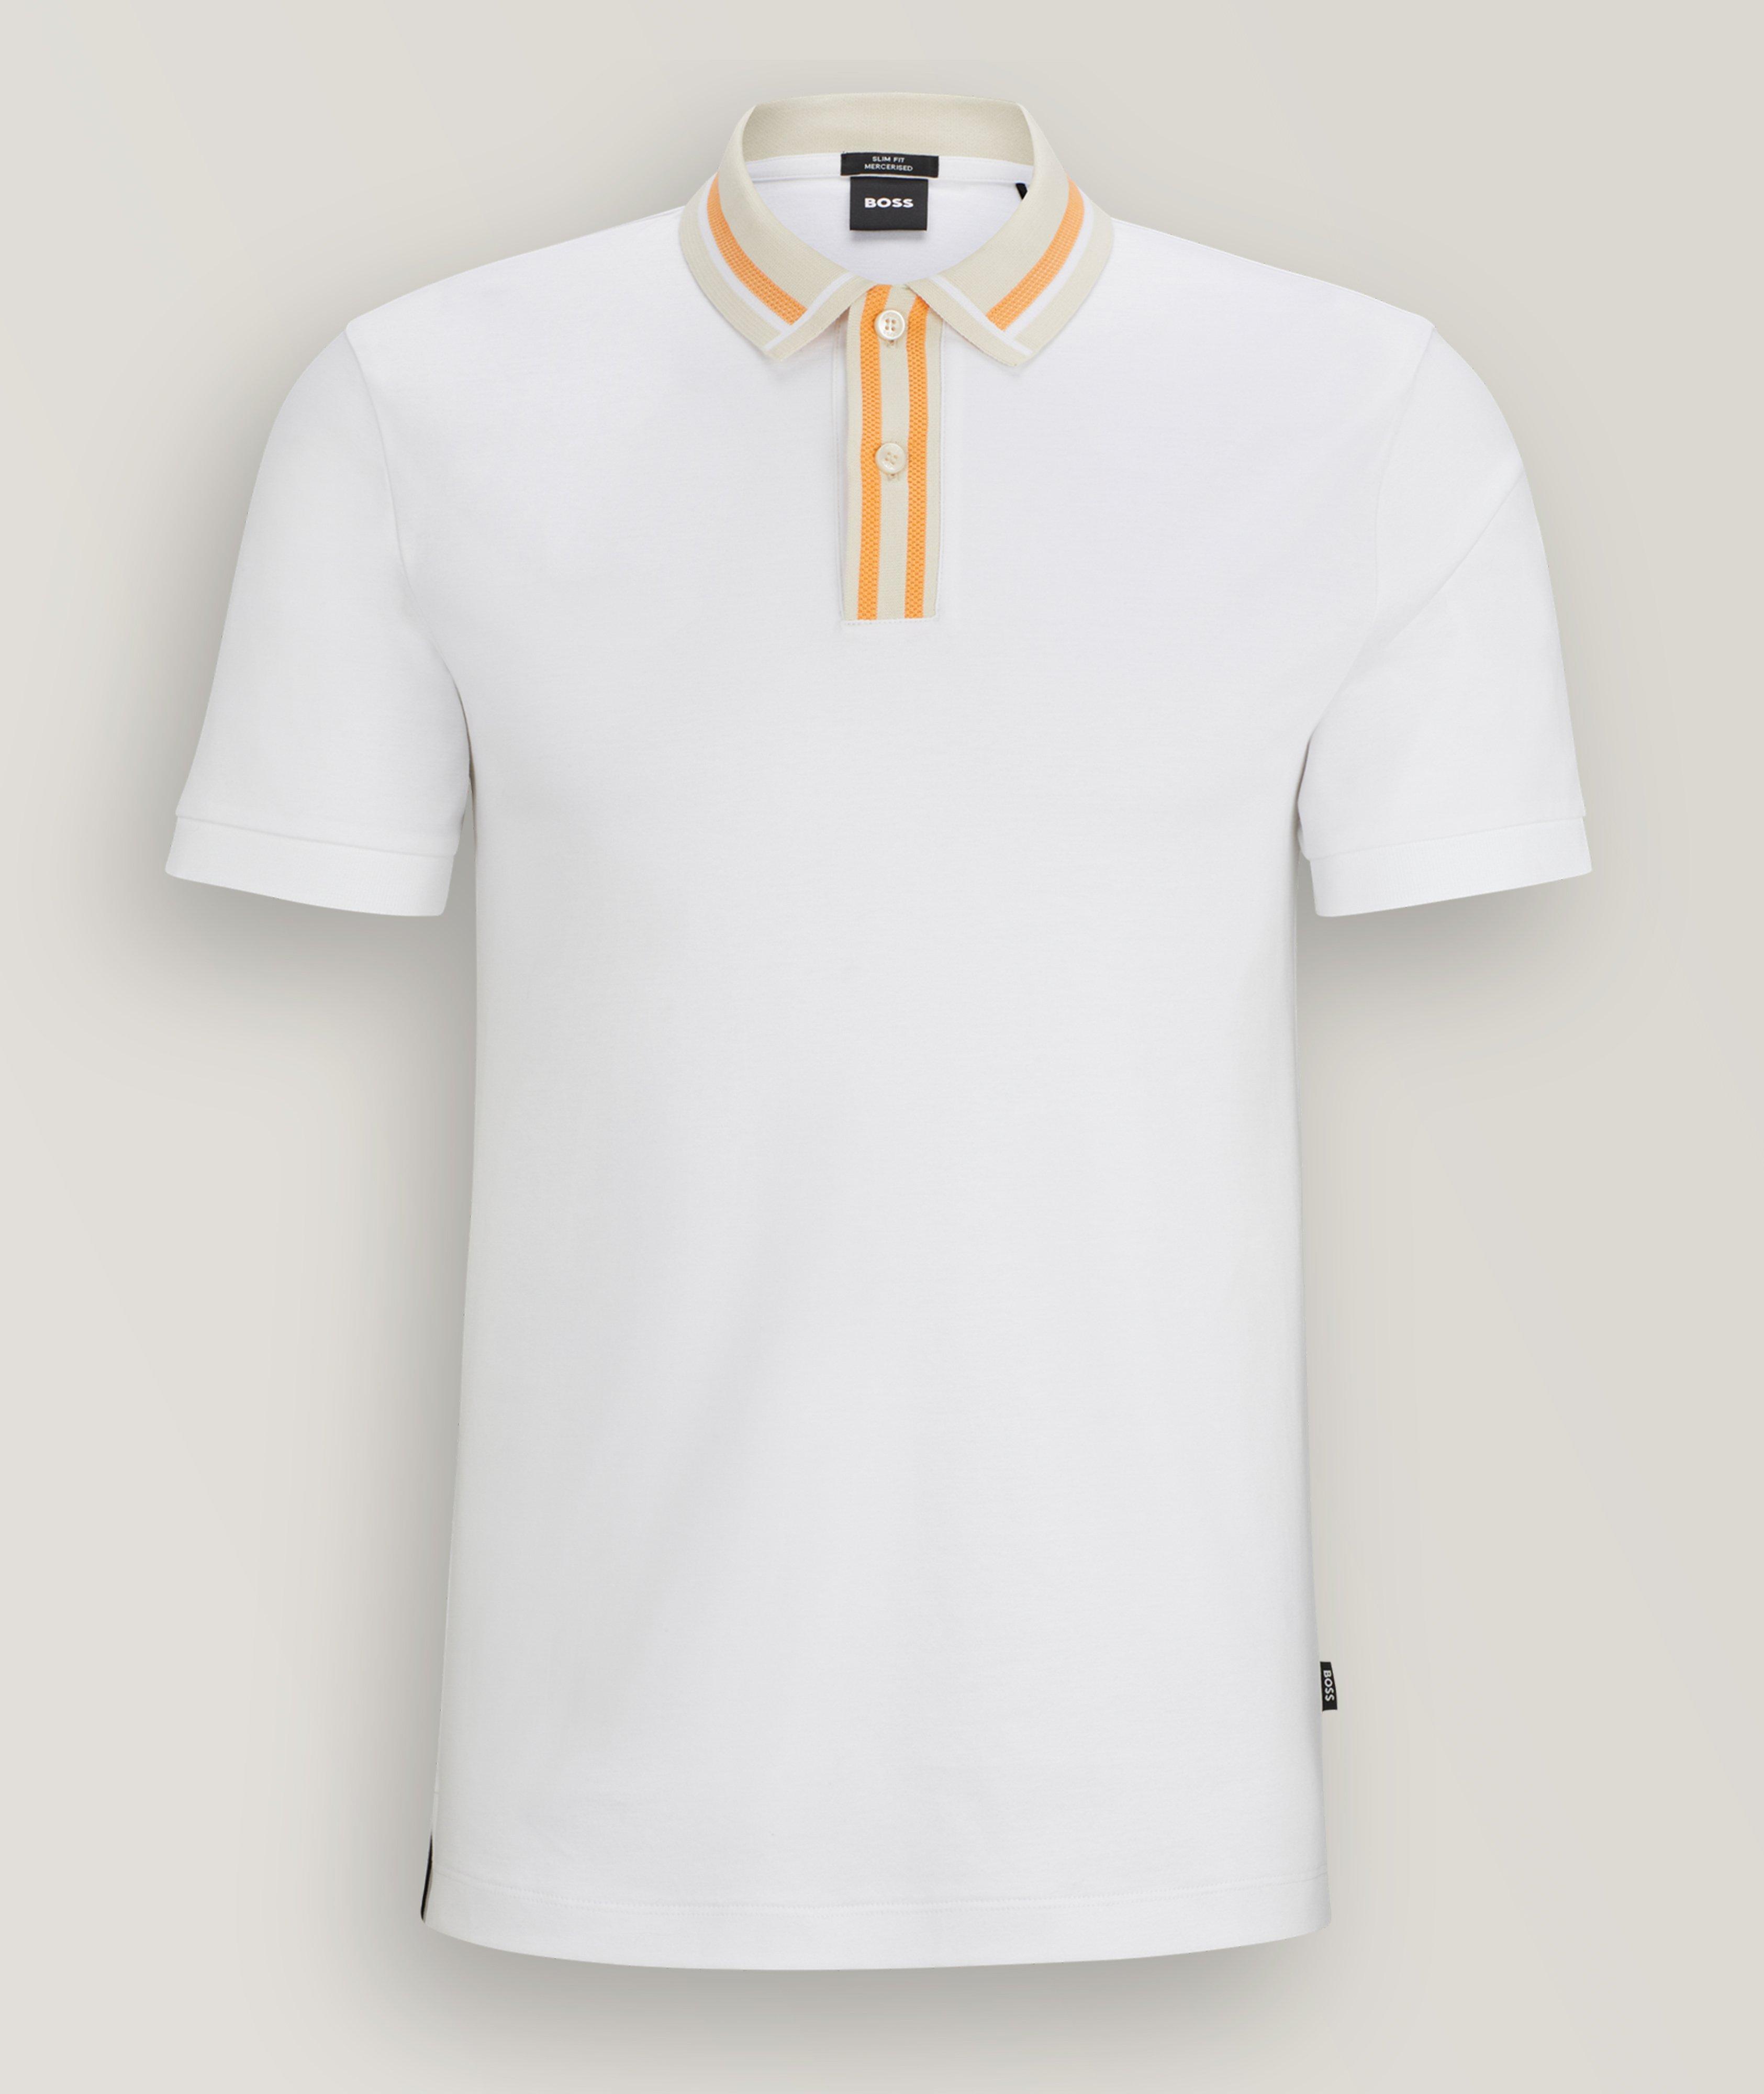 Responsible Contrast Striped Mercerised Cotton Polo